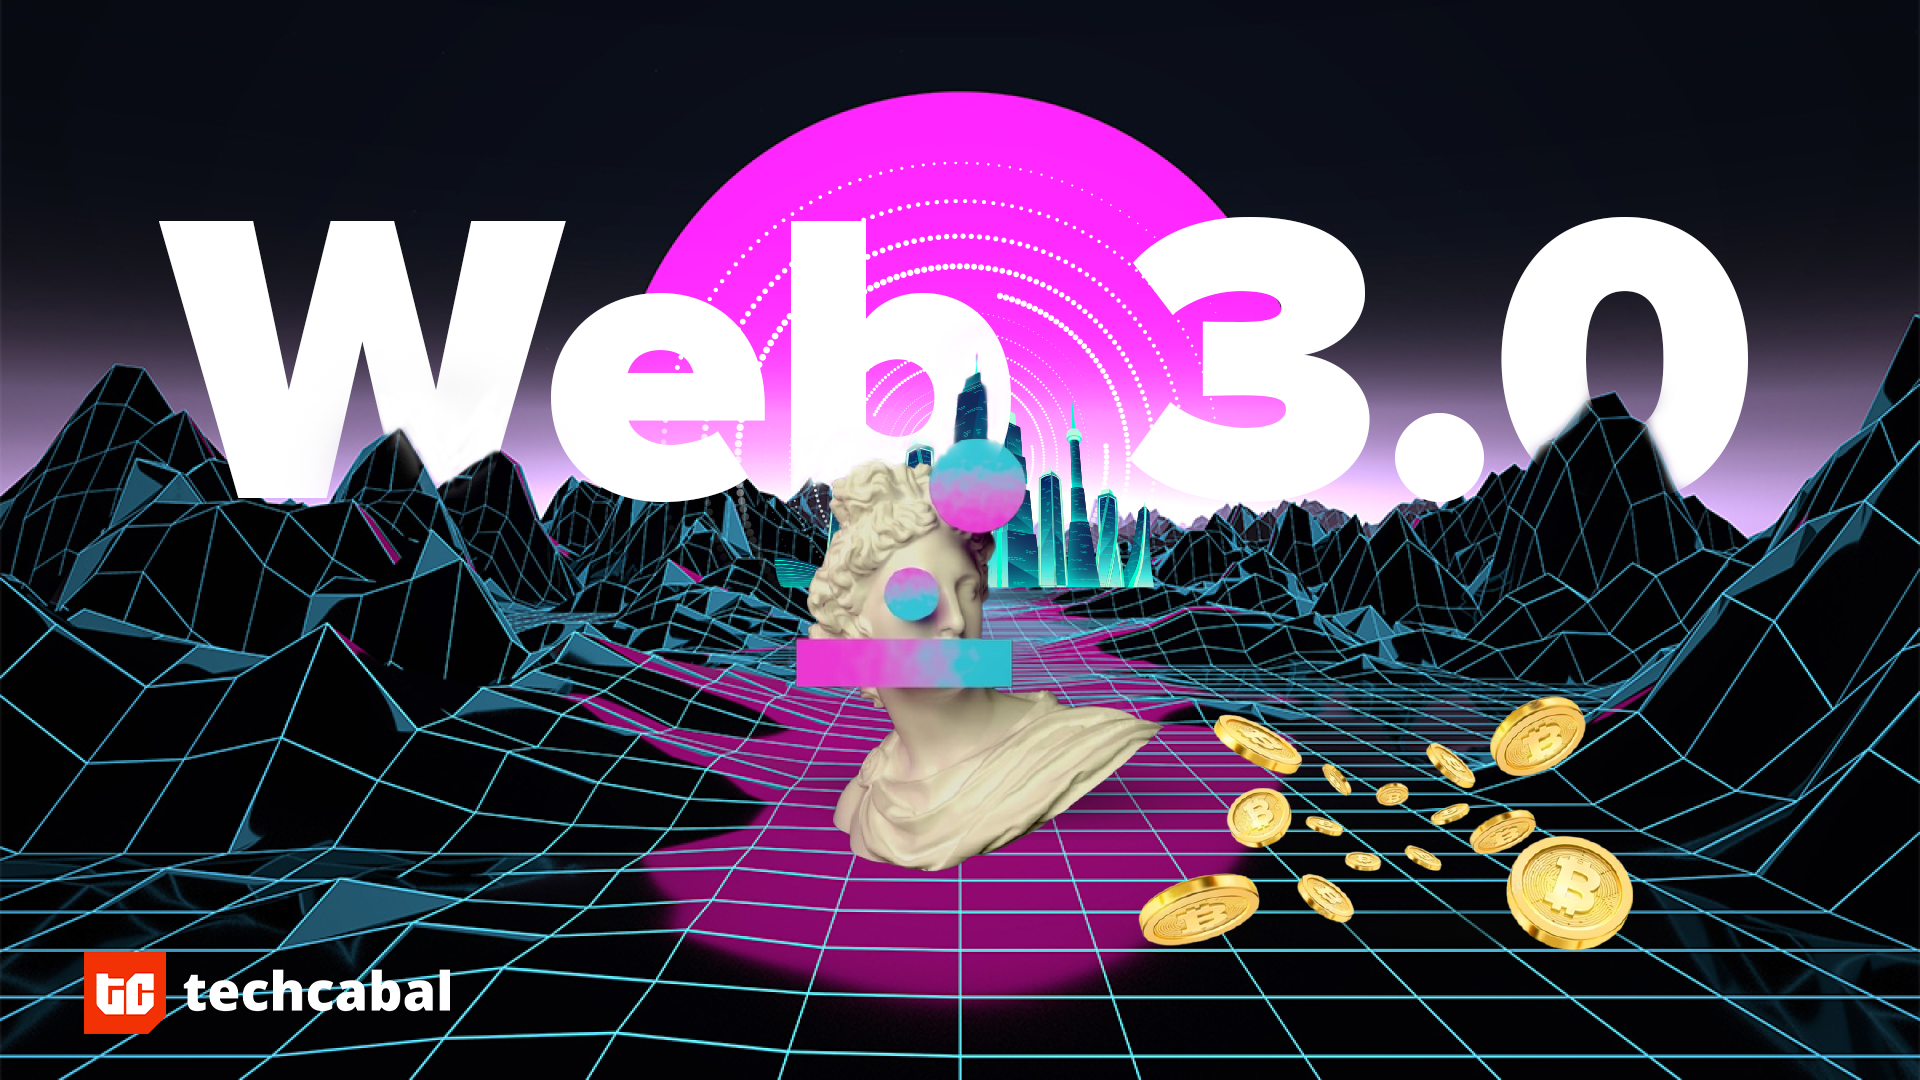 Free download Everything you need to know about Web3according to a blockchain [1920x1080] for your Desktop, Mobile & Tablet. Explore Web3 Wallpaper